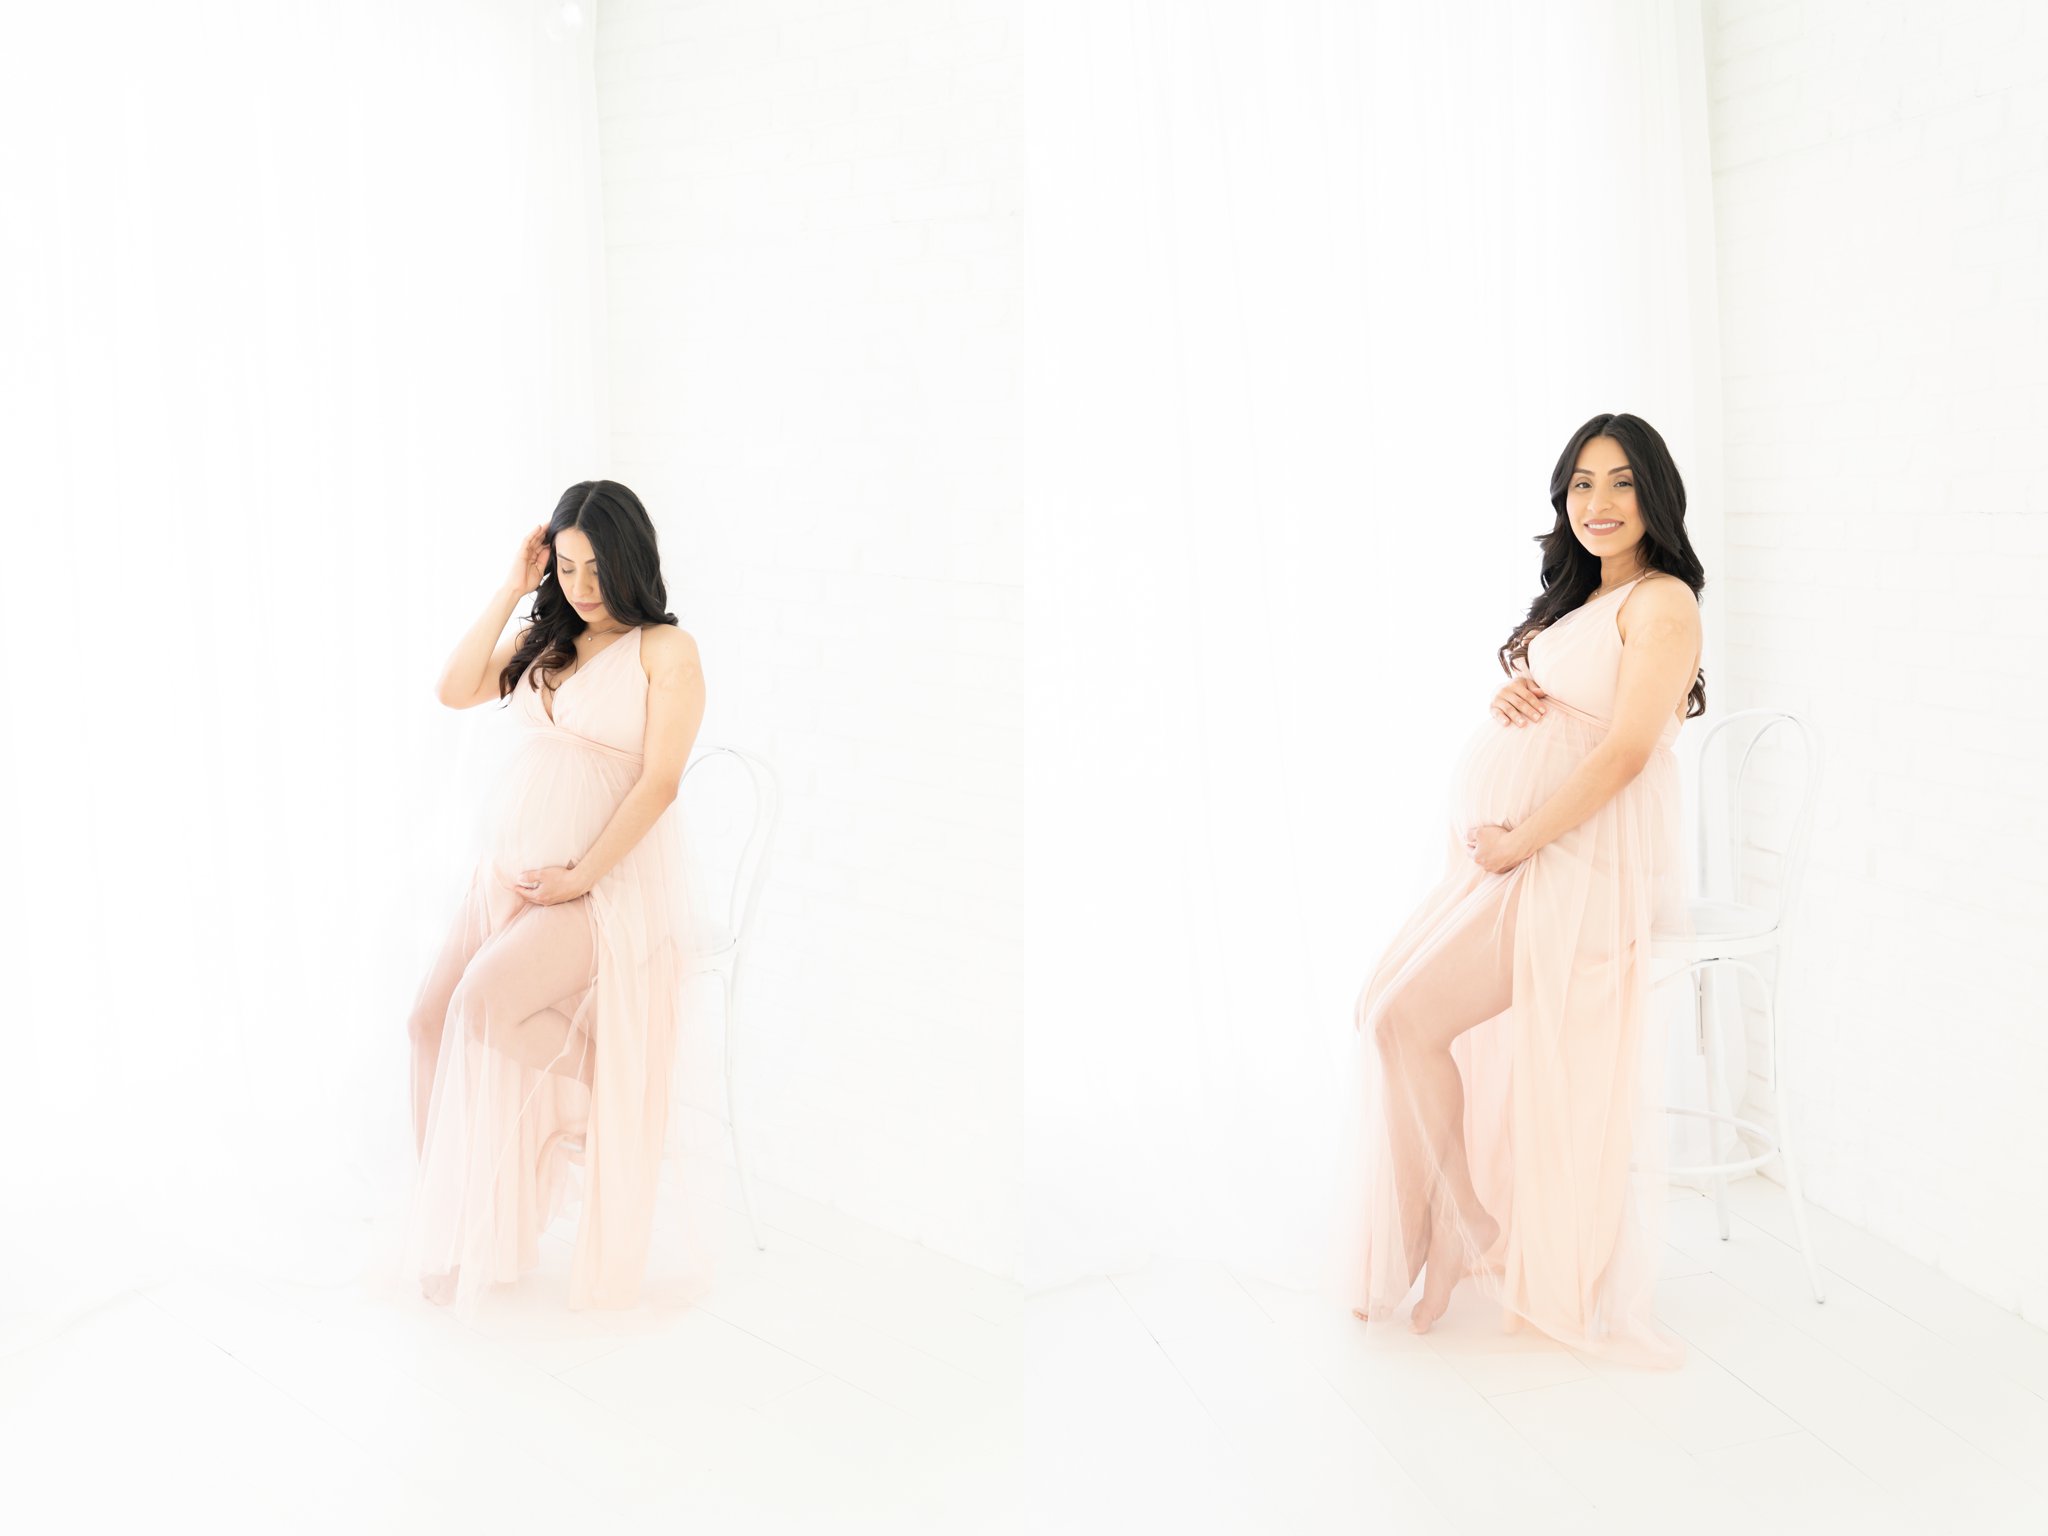 Mother-to-be being photographed in jupiter florida photography studio wearing a pink maxi dress.